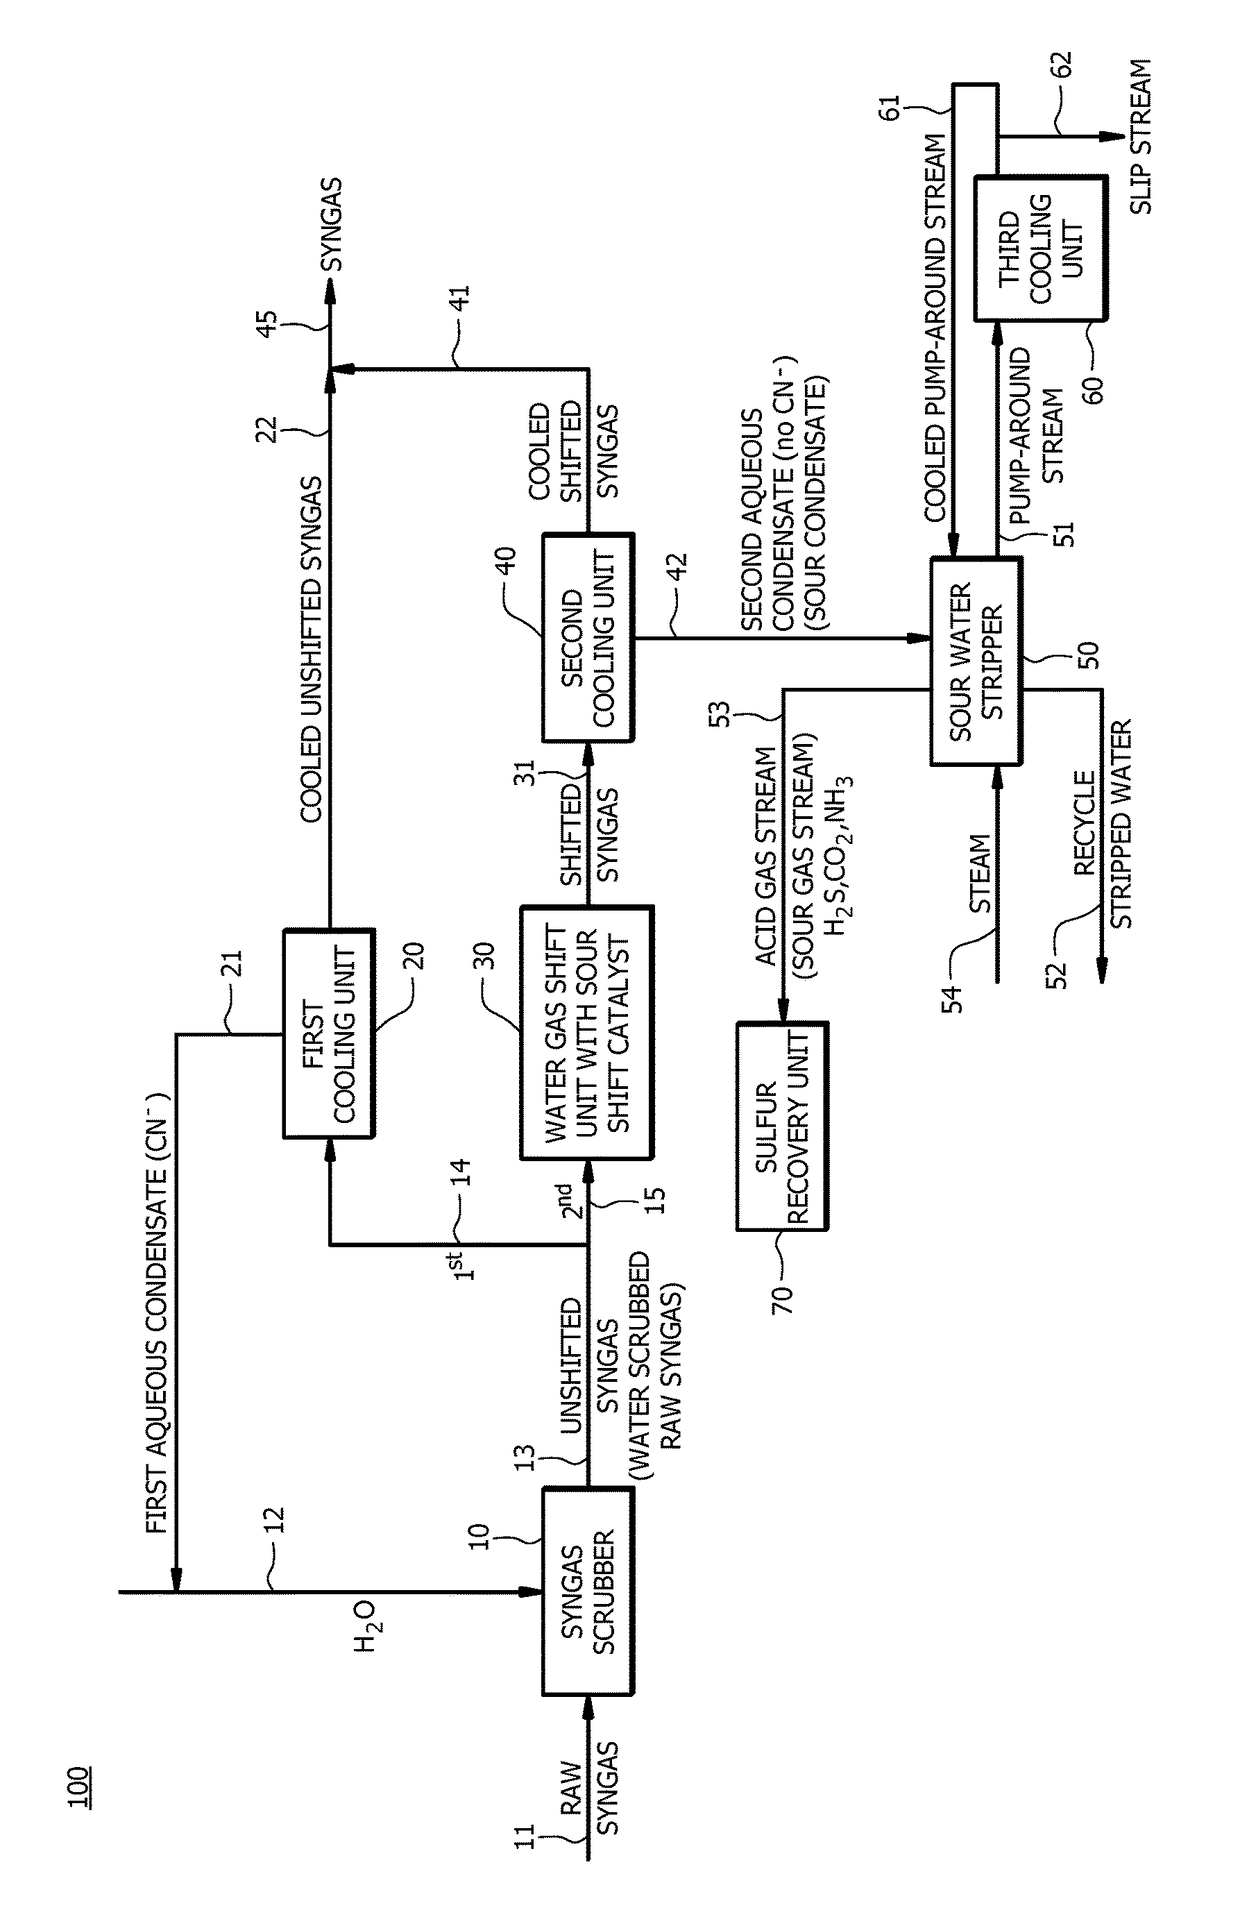 Method for avoiding expensive sour water stripper metallurgy in a gasification plant